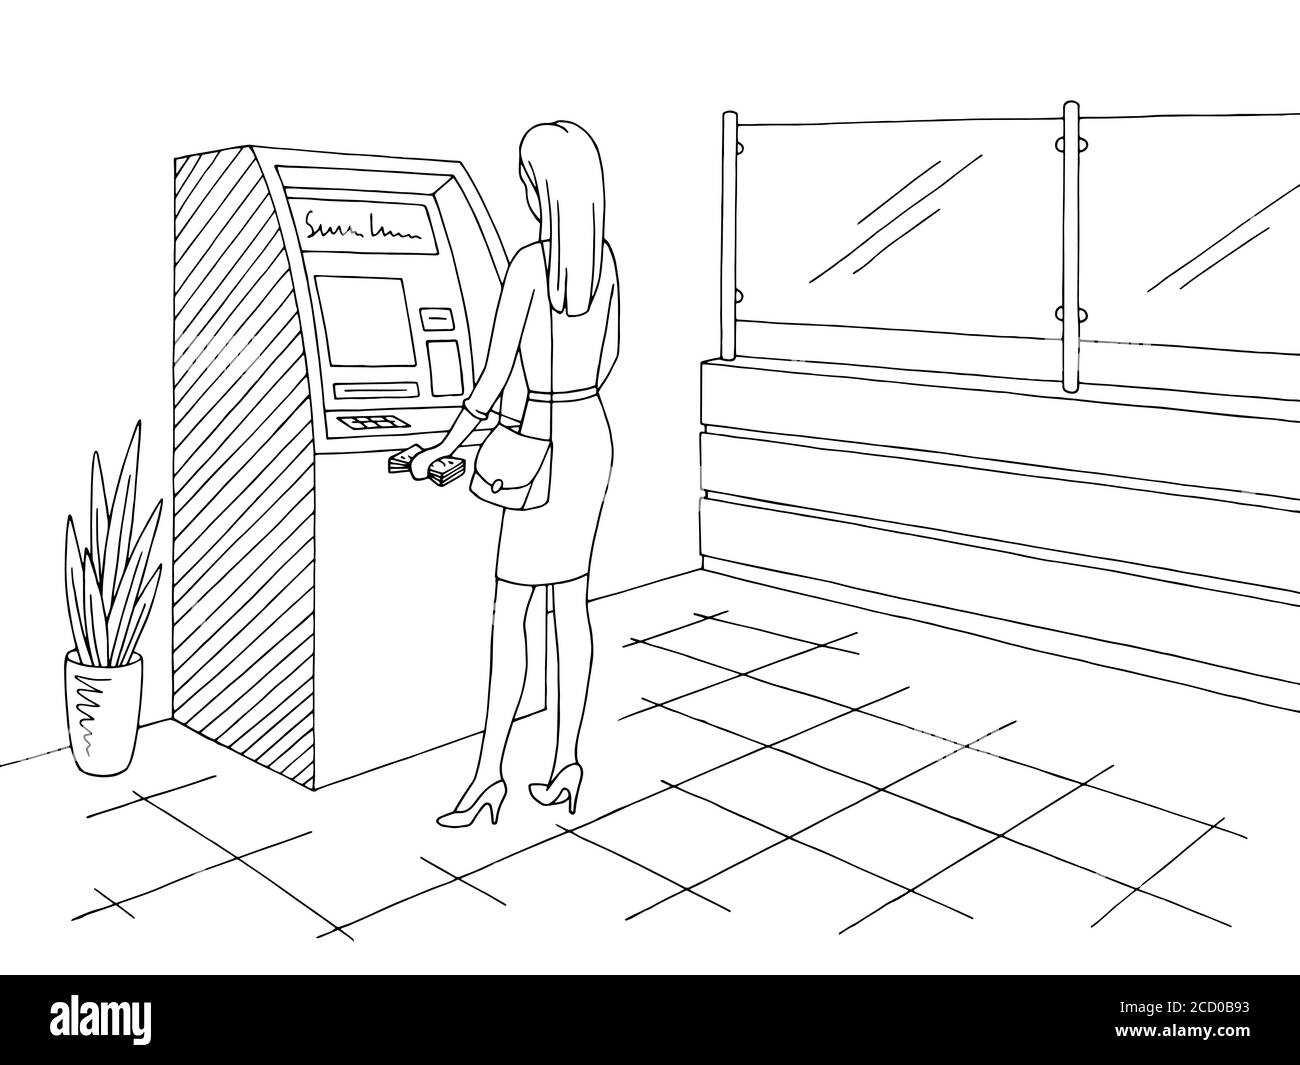 Bank interior graphic black white sketch illustration vector. Woman withdrawing cash from an ATM Stock Vector